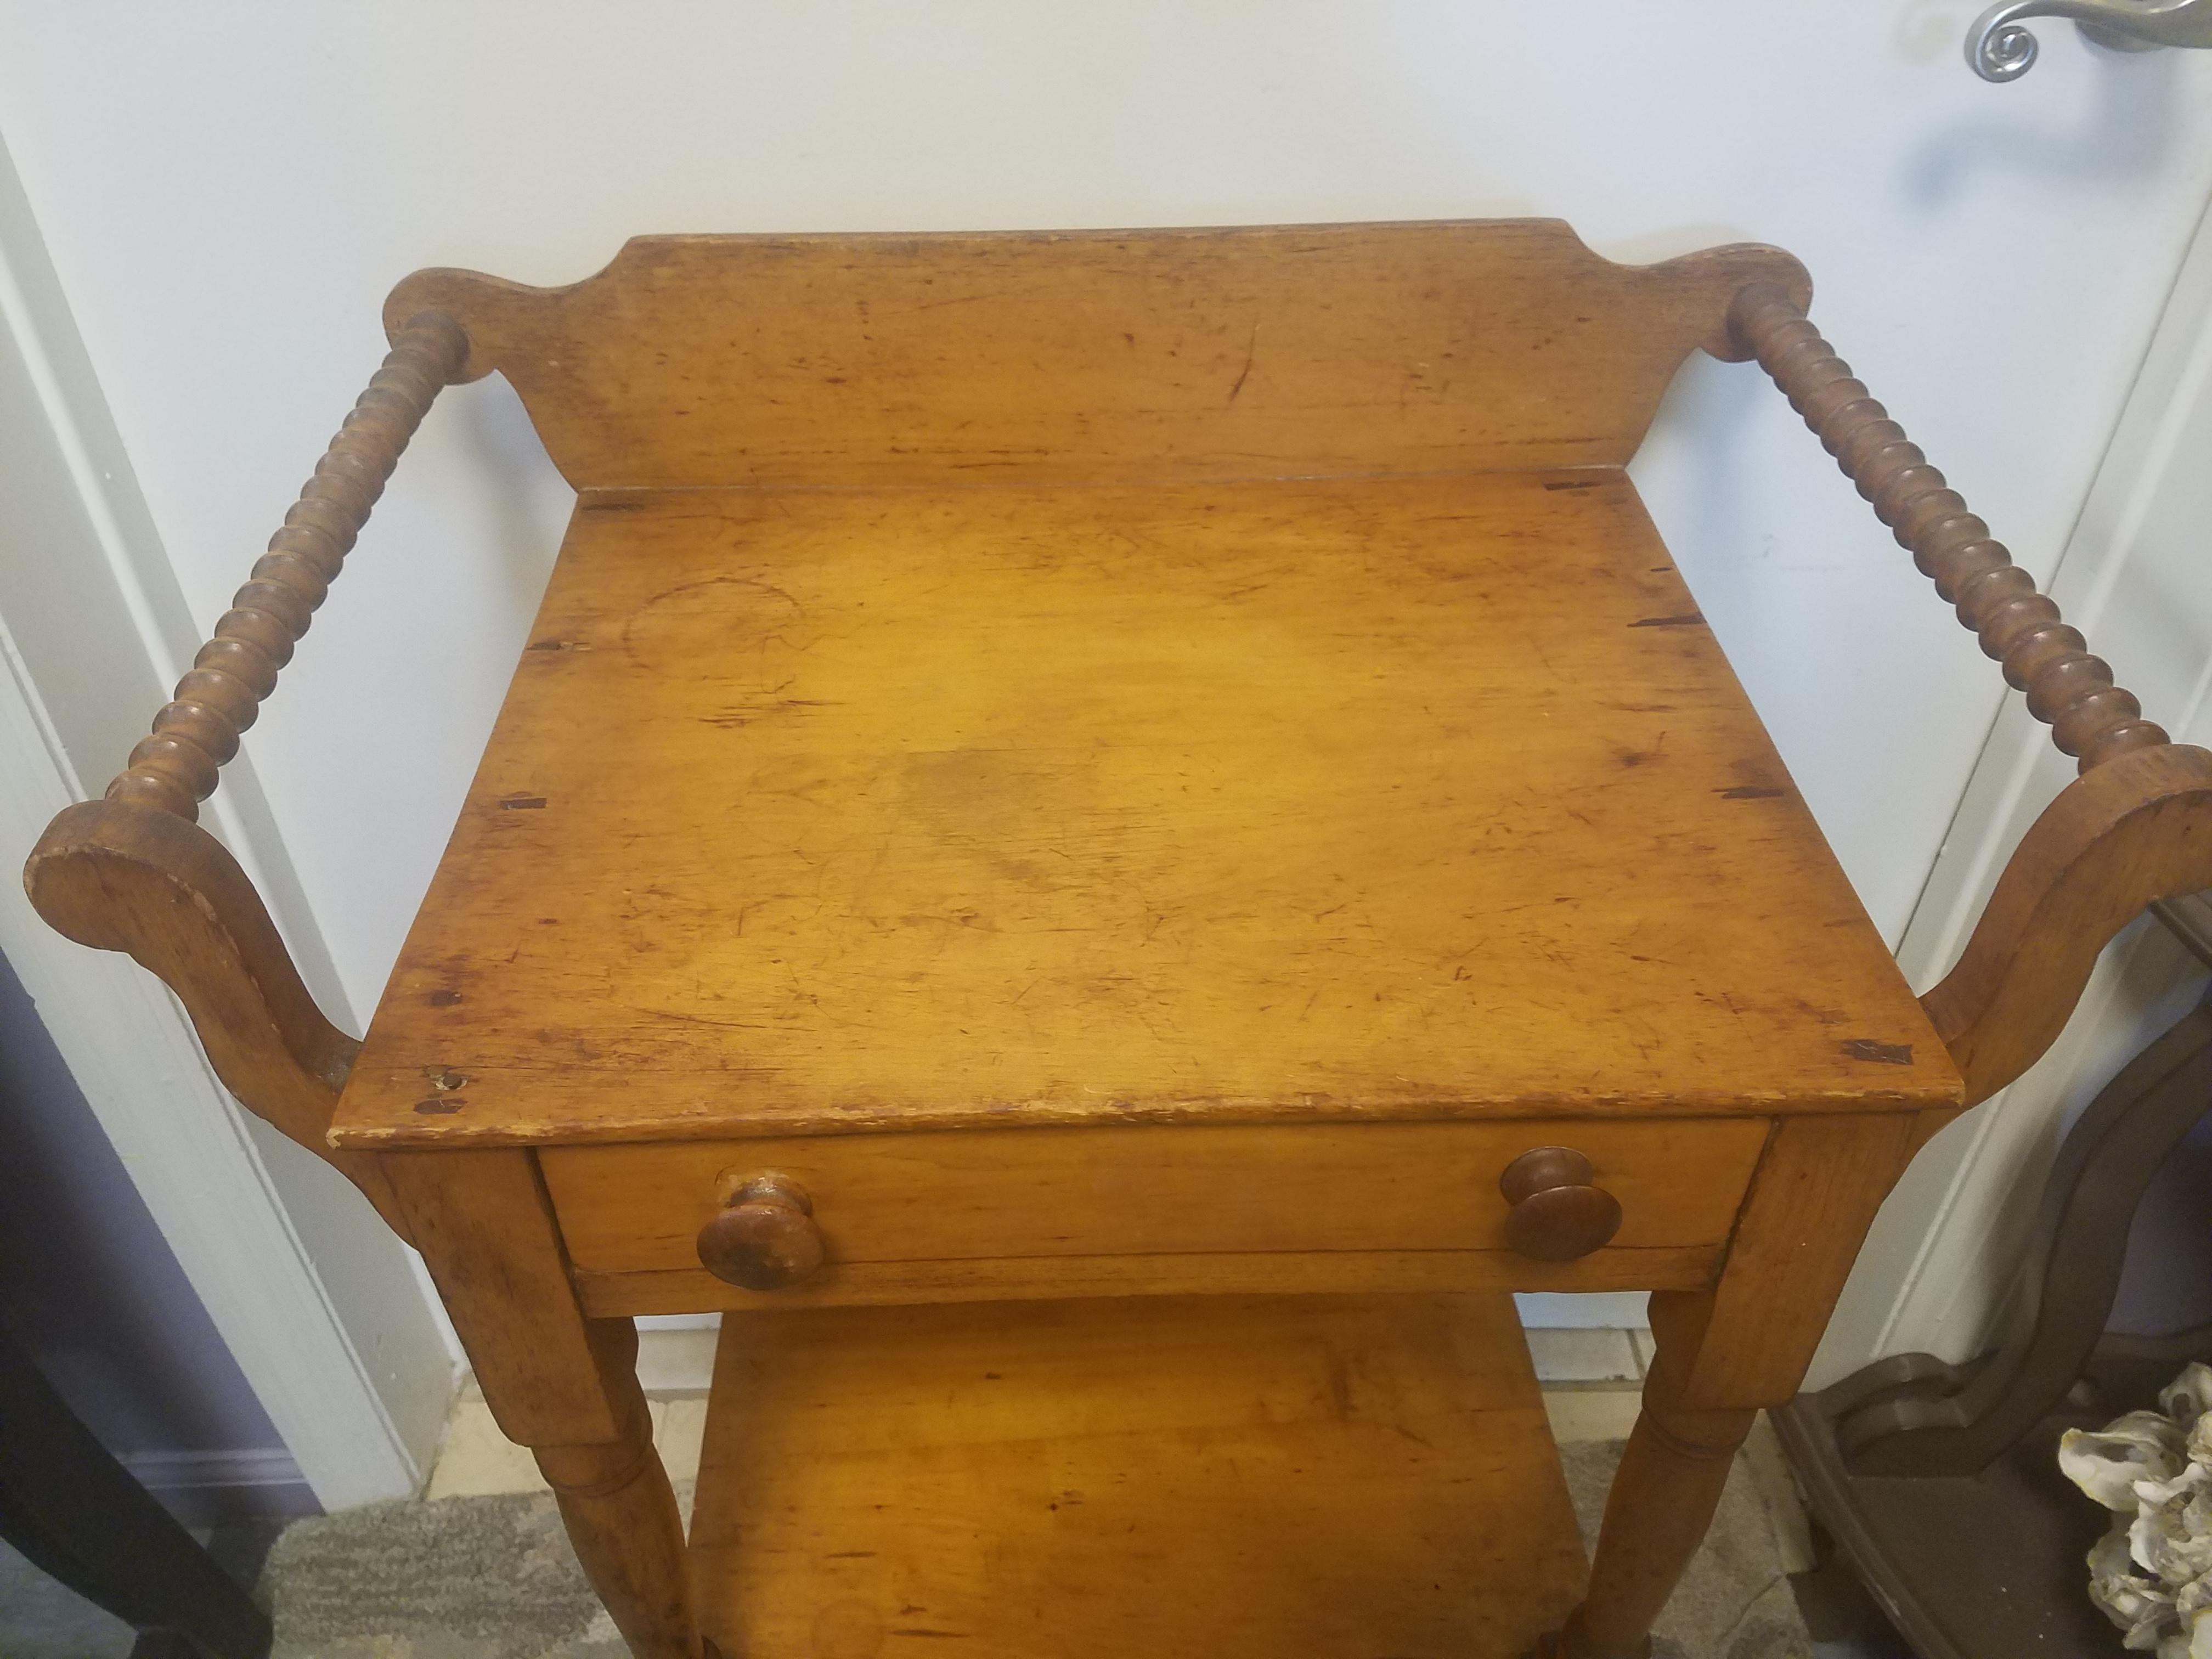 Antique American oak. Hand-turned spindle accents on the two sides. See detailed picture. Very rustic and shows many signed of use. There is a chip on the back (see last picture). There are two different wood pulls. From the Pennsylvania area of the